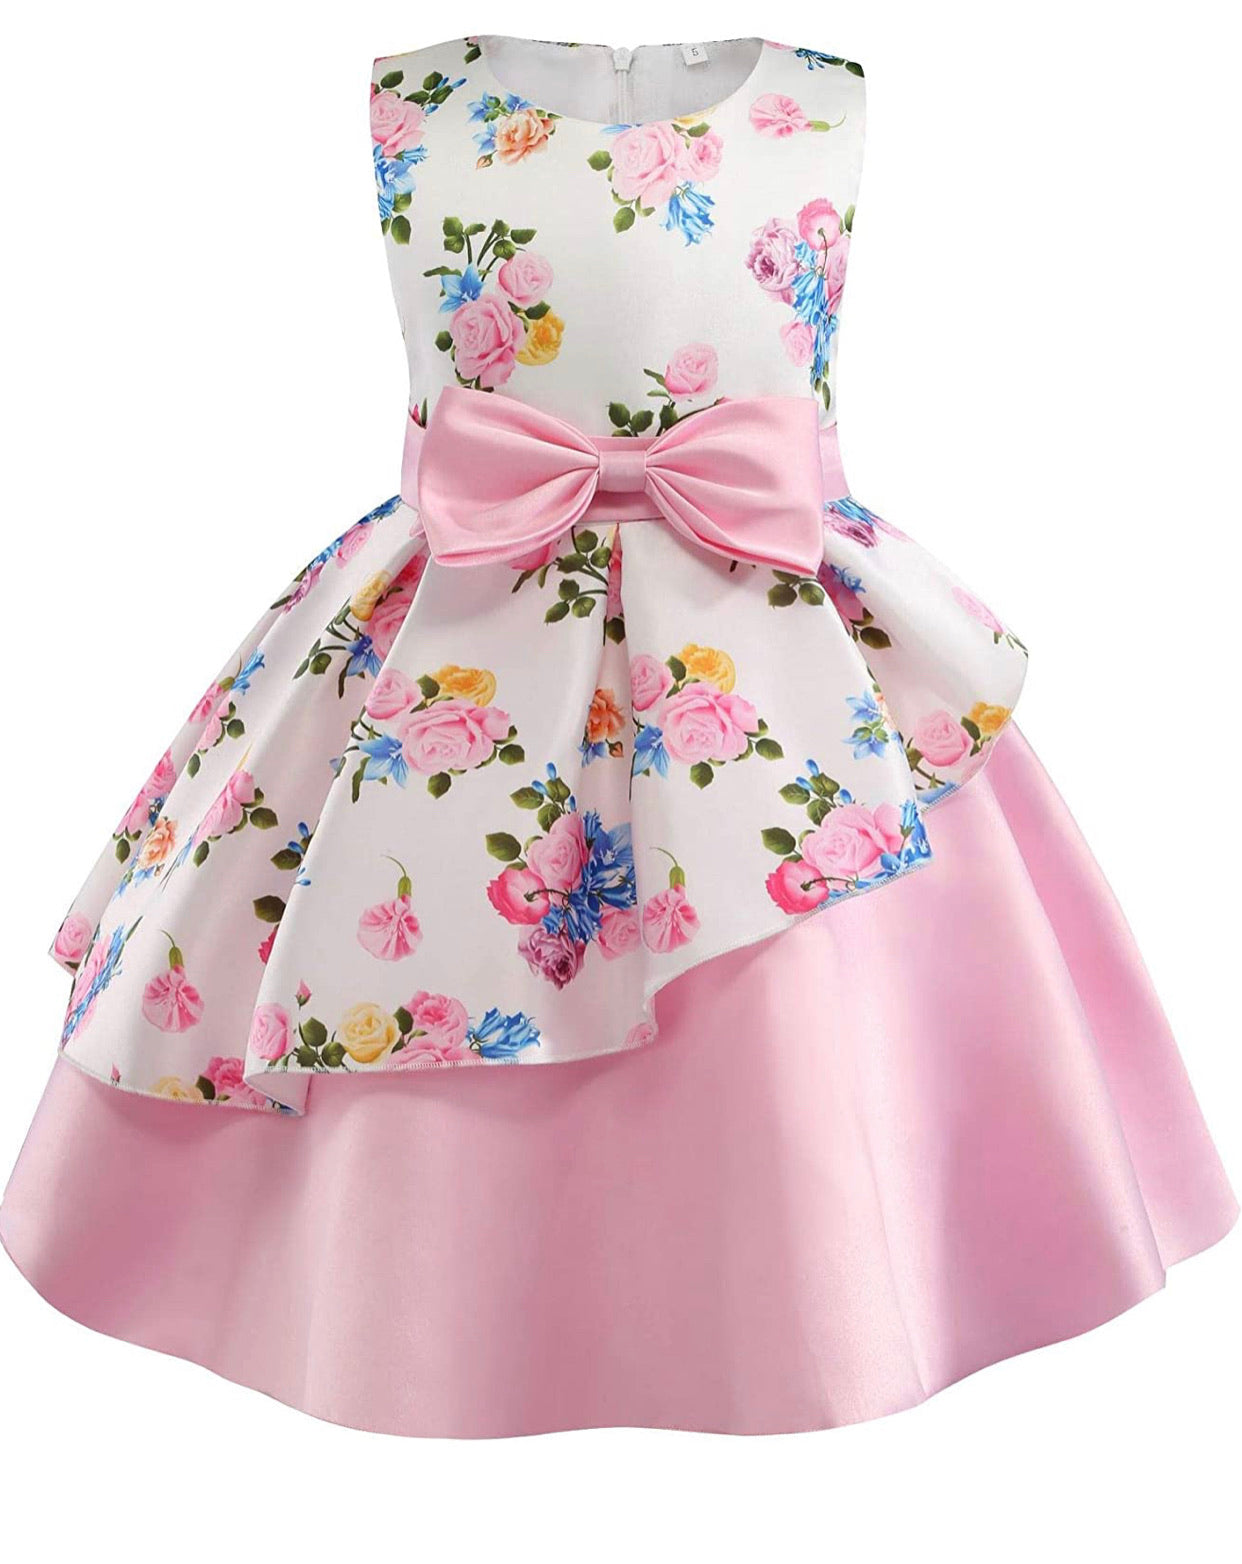 Little Girl’s Formal Floral Print Dress, Sizes 2T - 9 years (Pink)